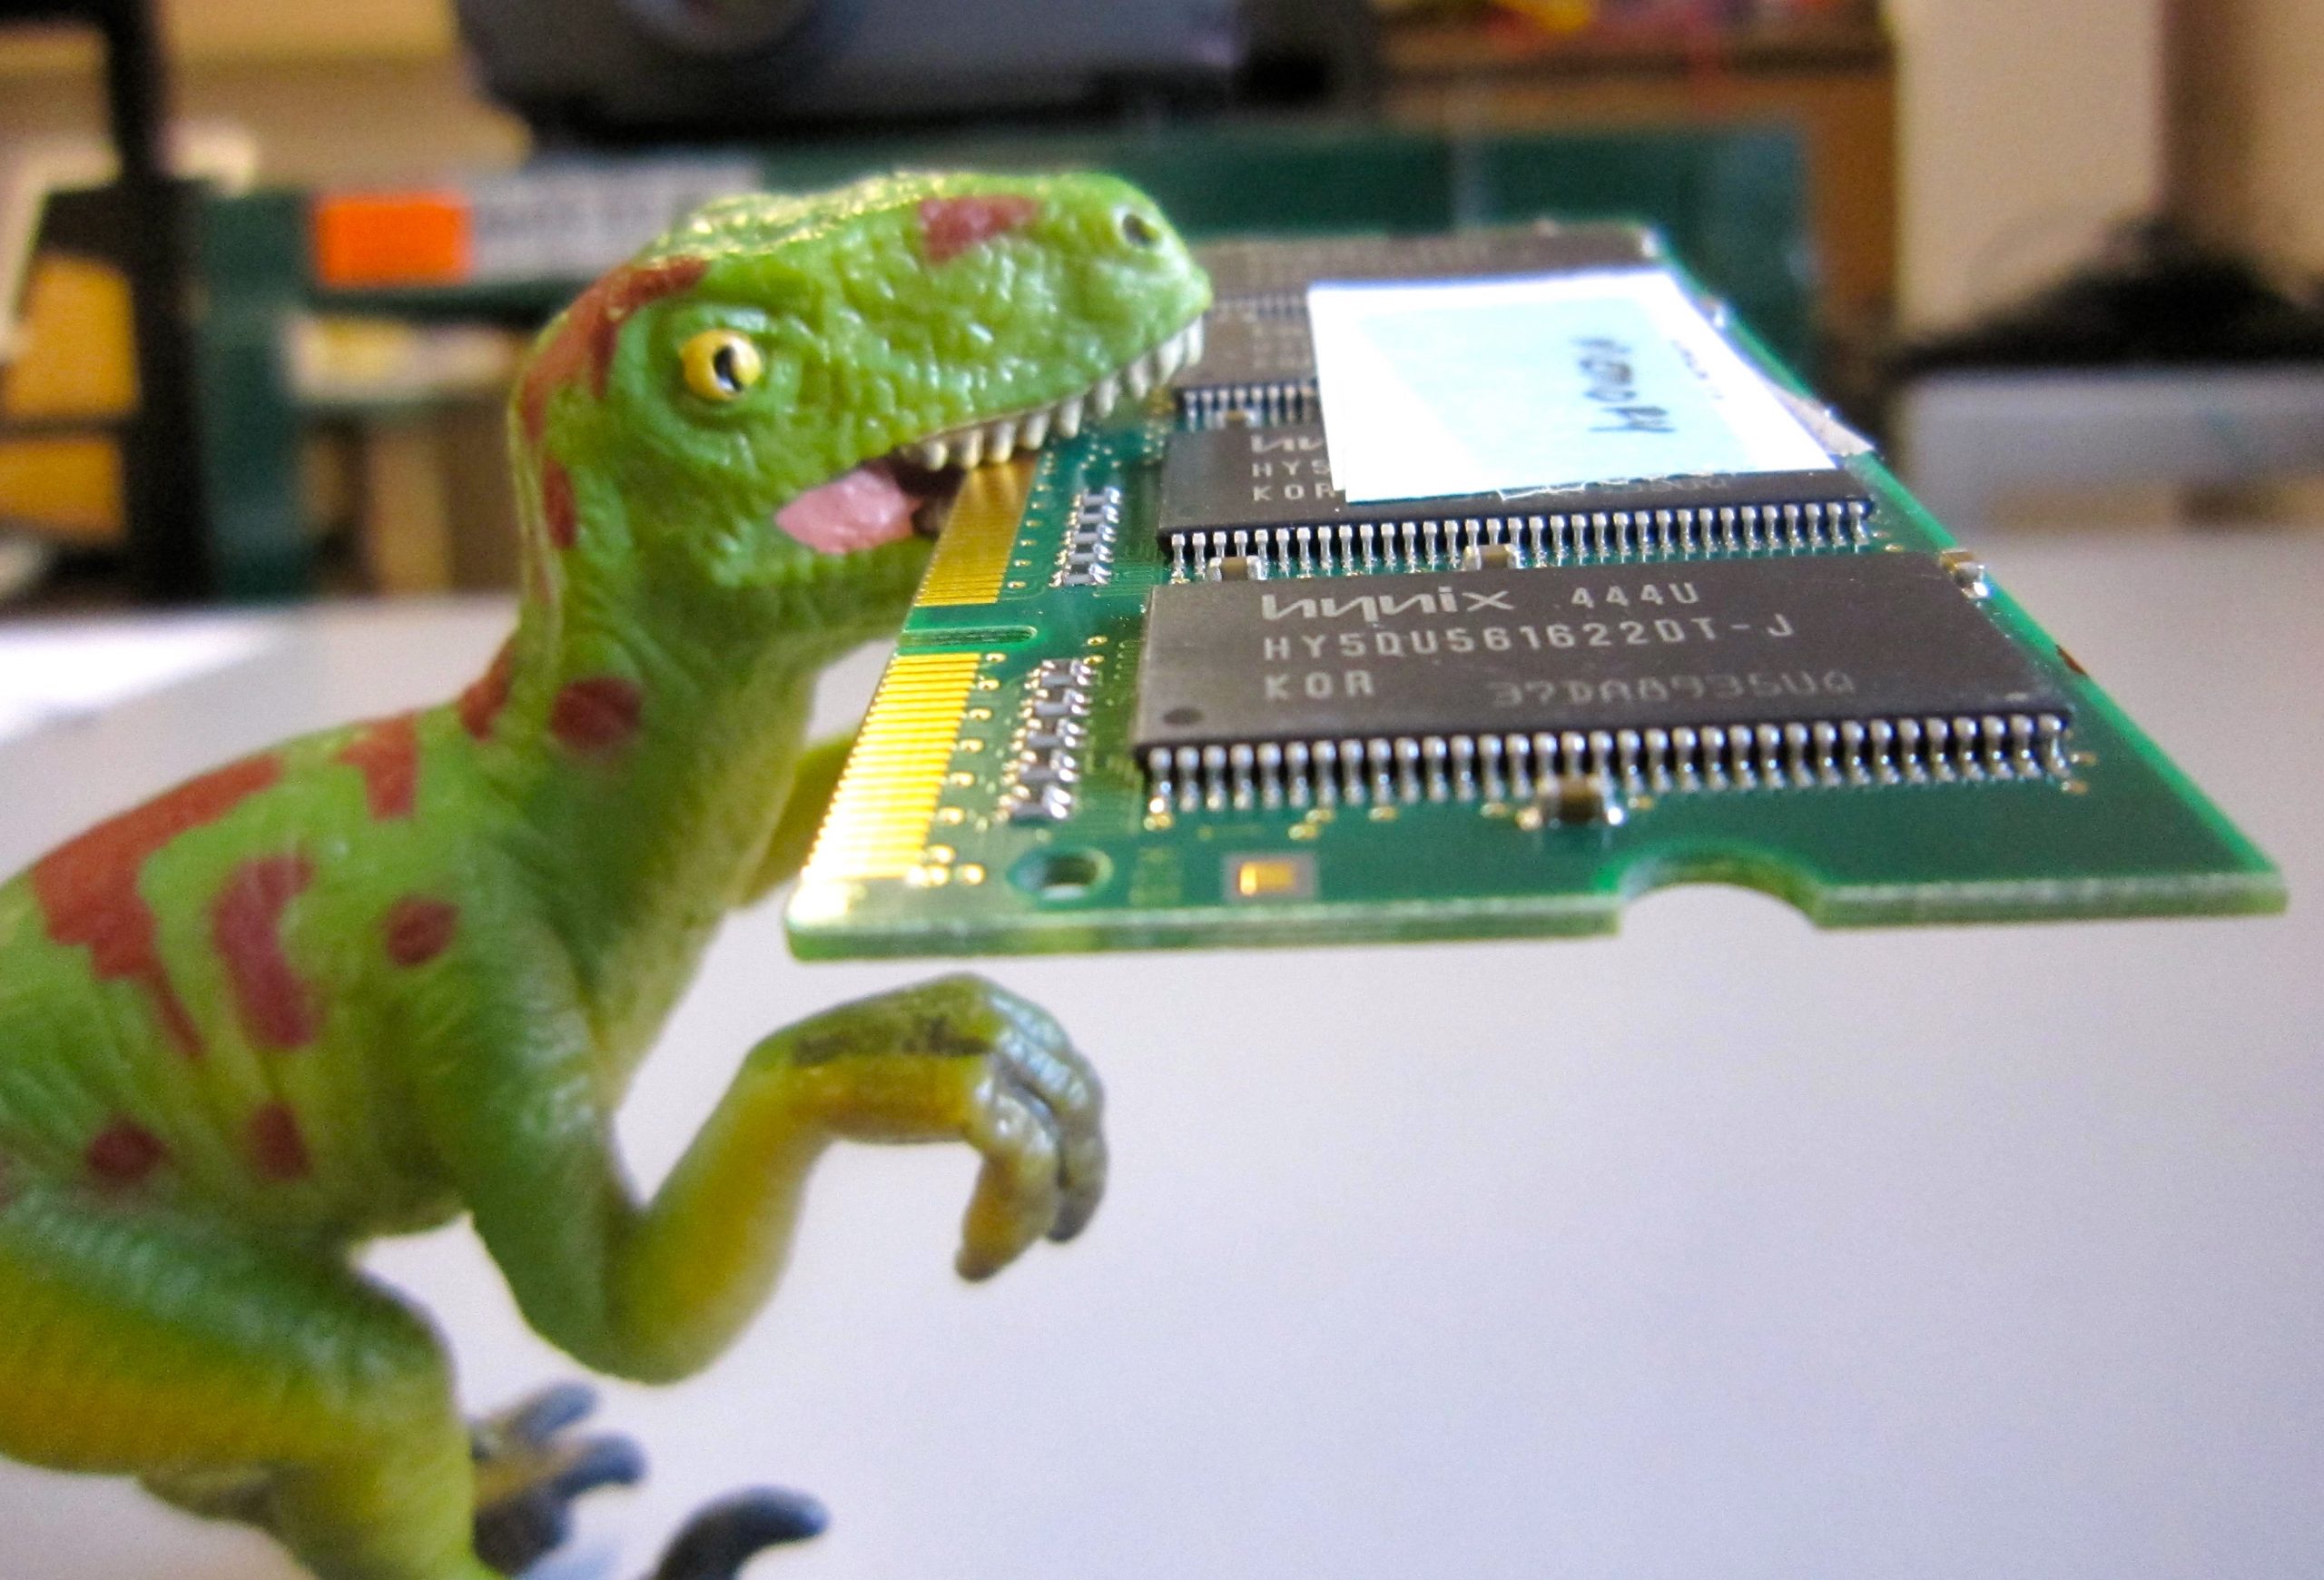 Toy dinosaur eating a computer chip